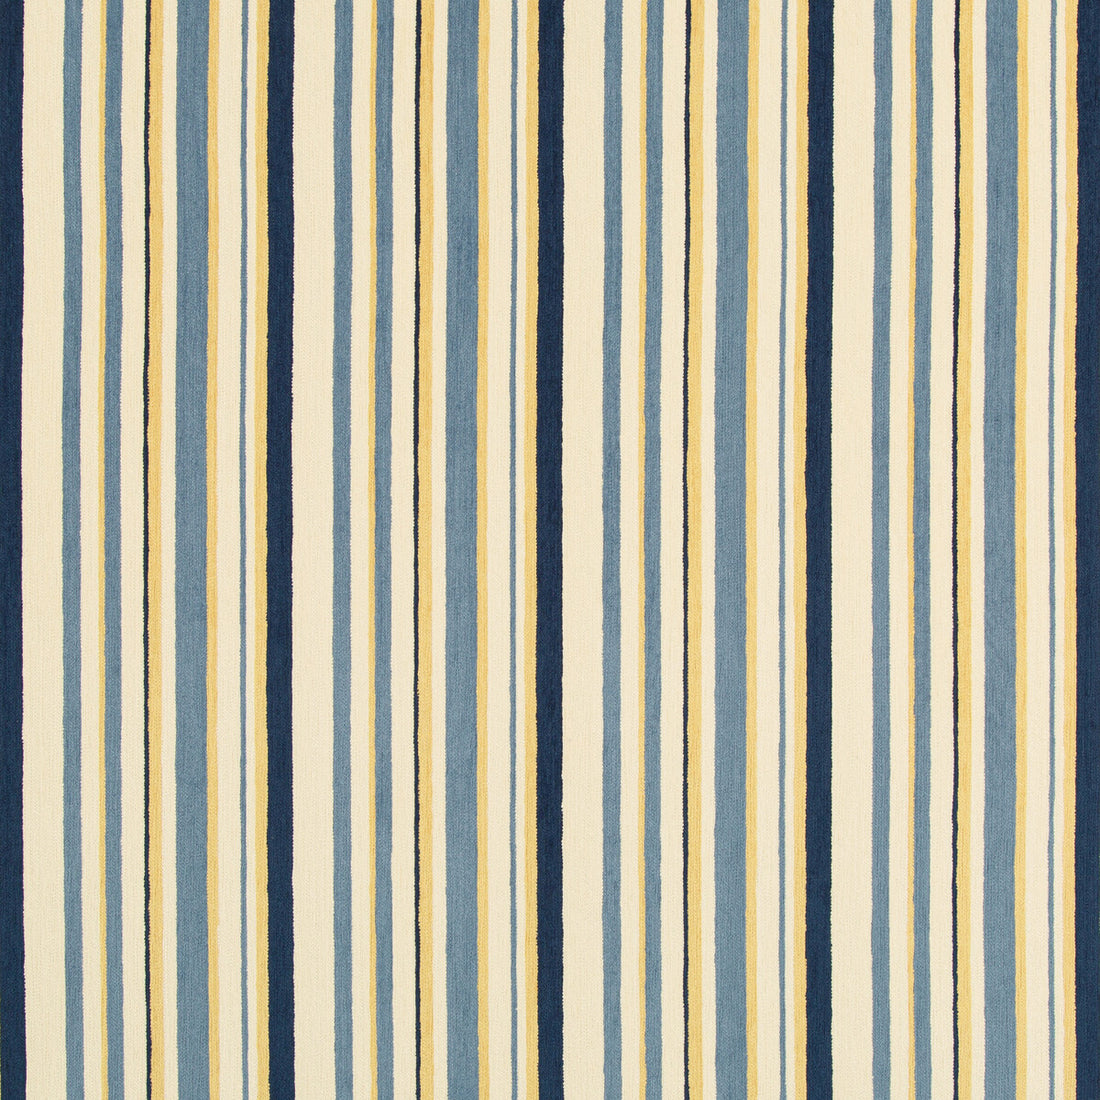 Causeway fabric in lakeside color - pattern 35868.516.0 - by Kravet Contract in the Gis Crypton collection